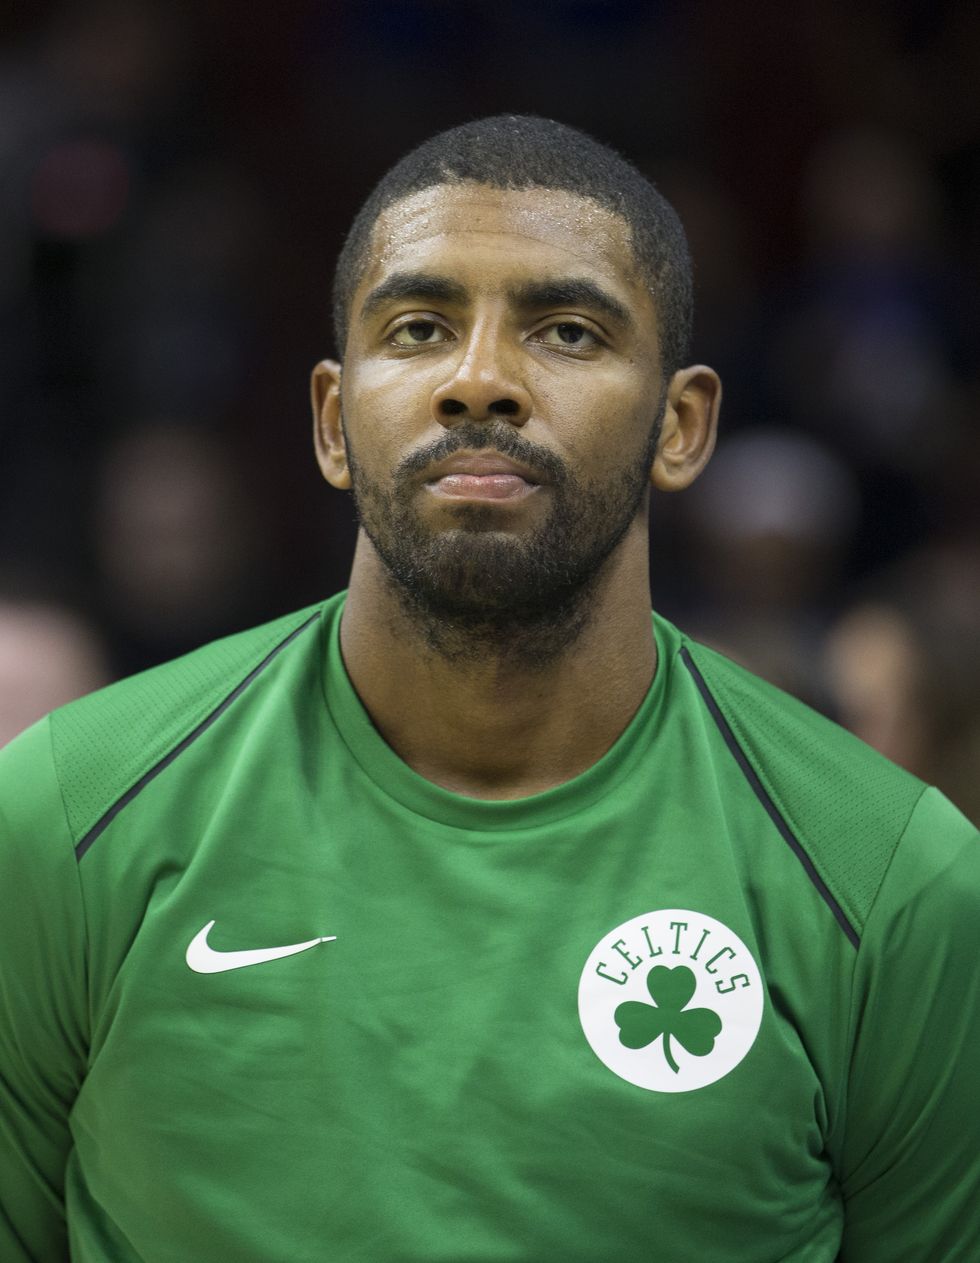 Kyrie Irving Seeks to Be Renaissance Man in FIBA, NBA and Life